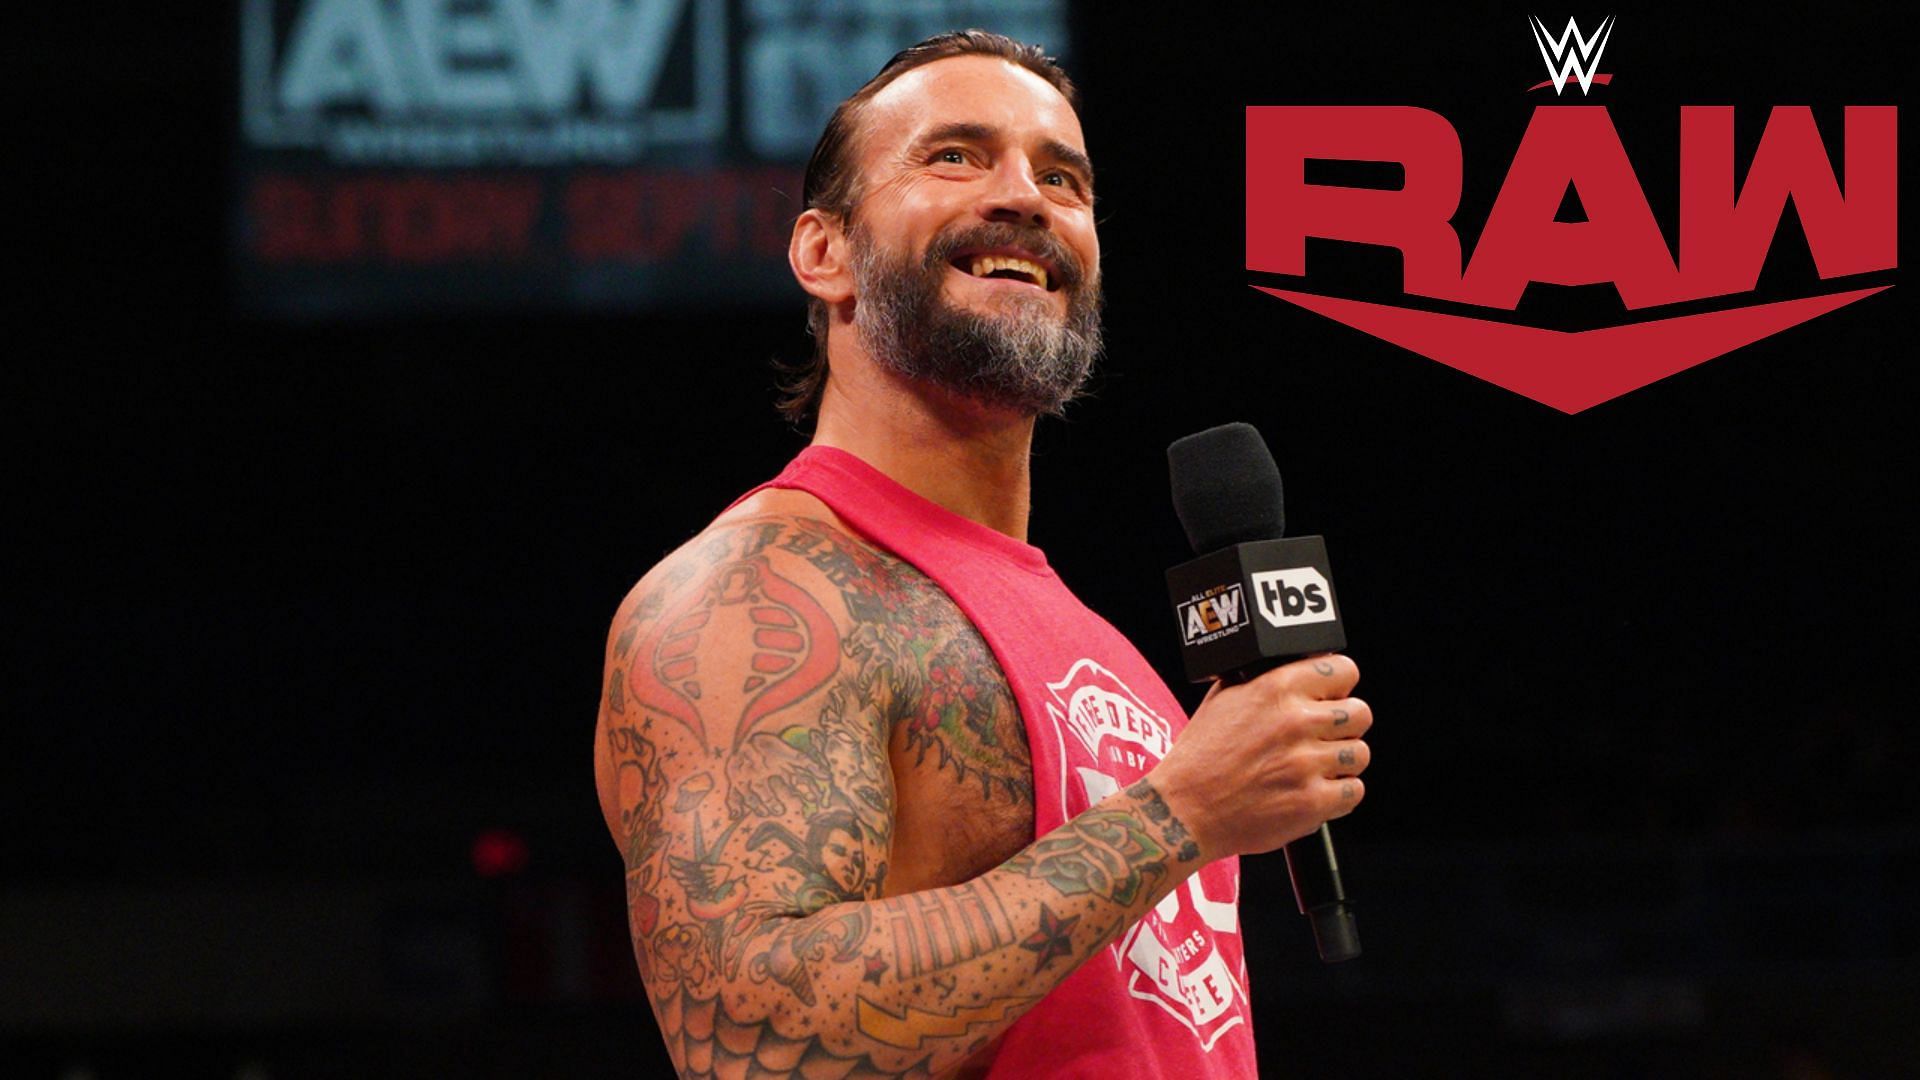 Did CM Punk have ulterior motives with his backstage appearance at WWE RAW?